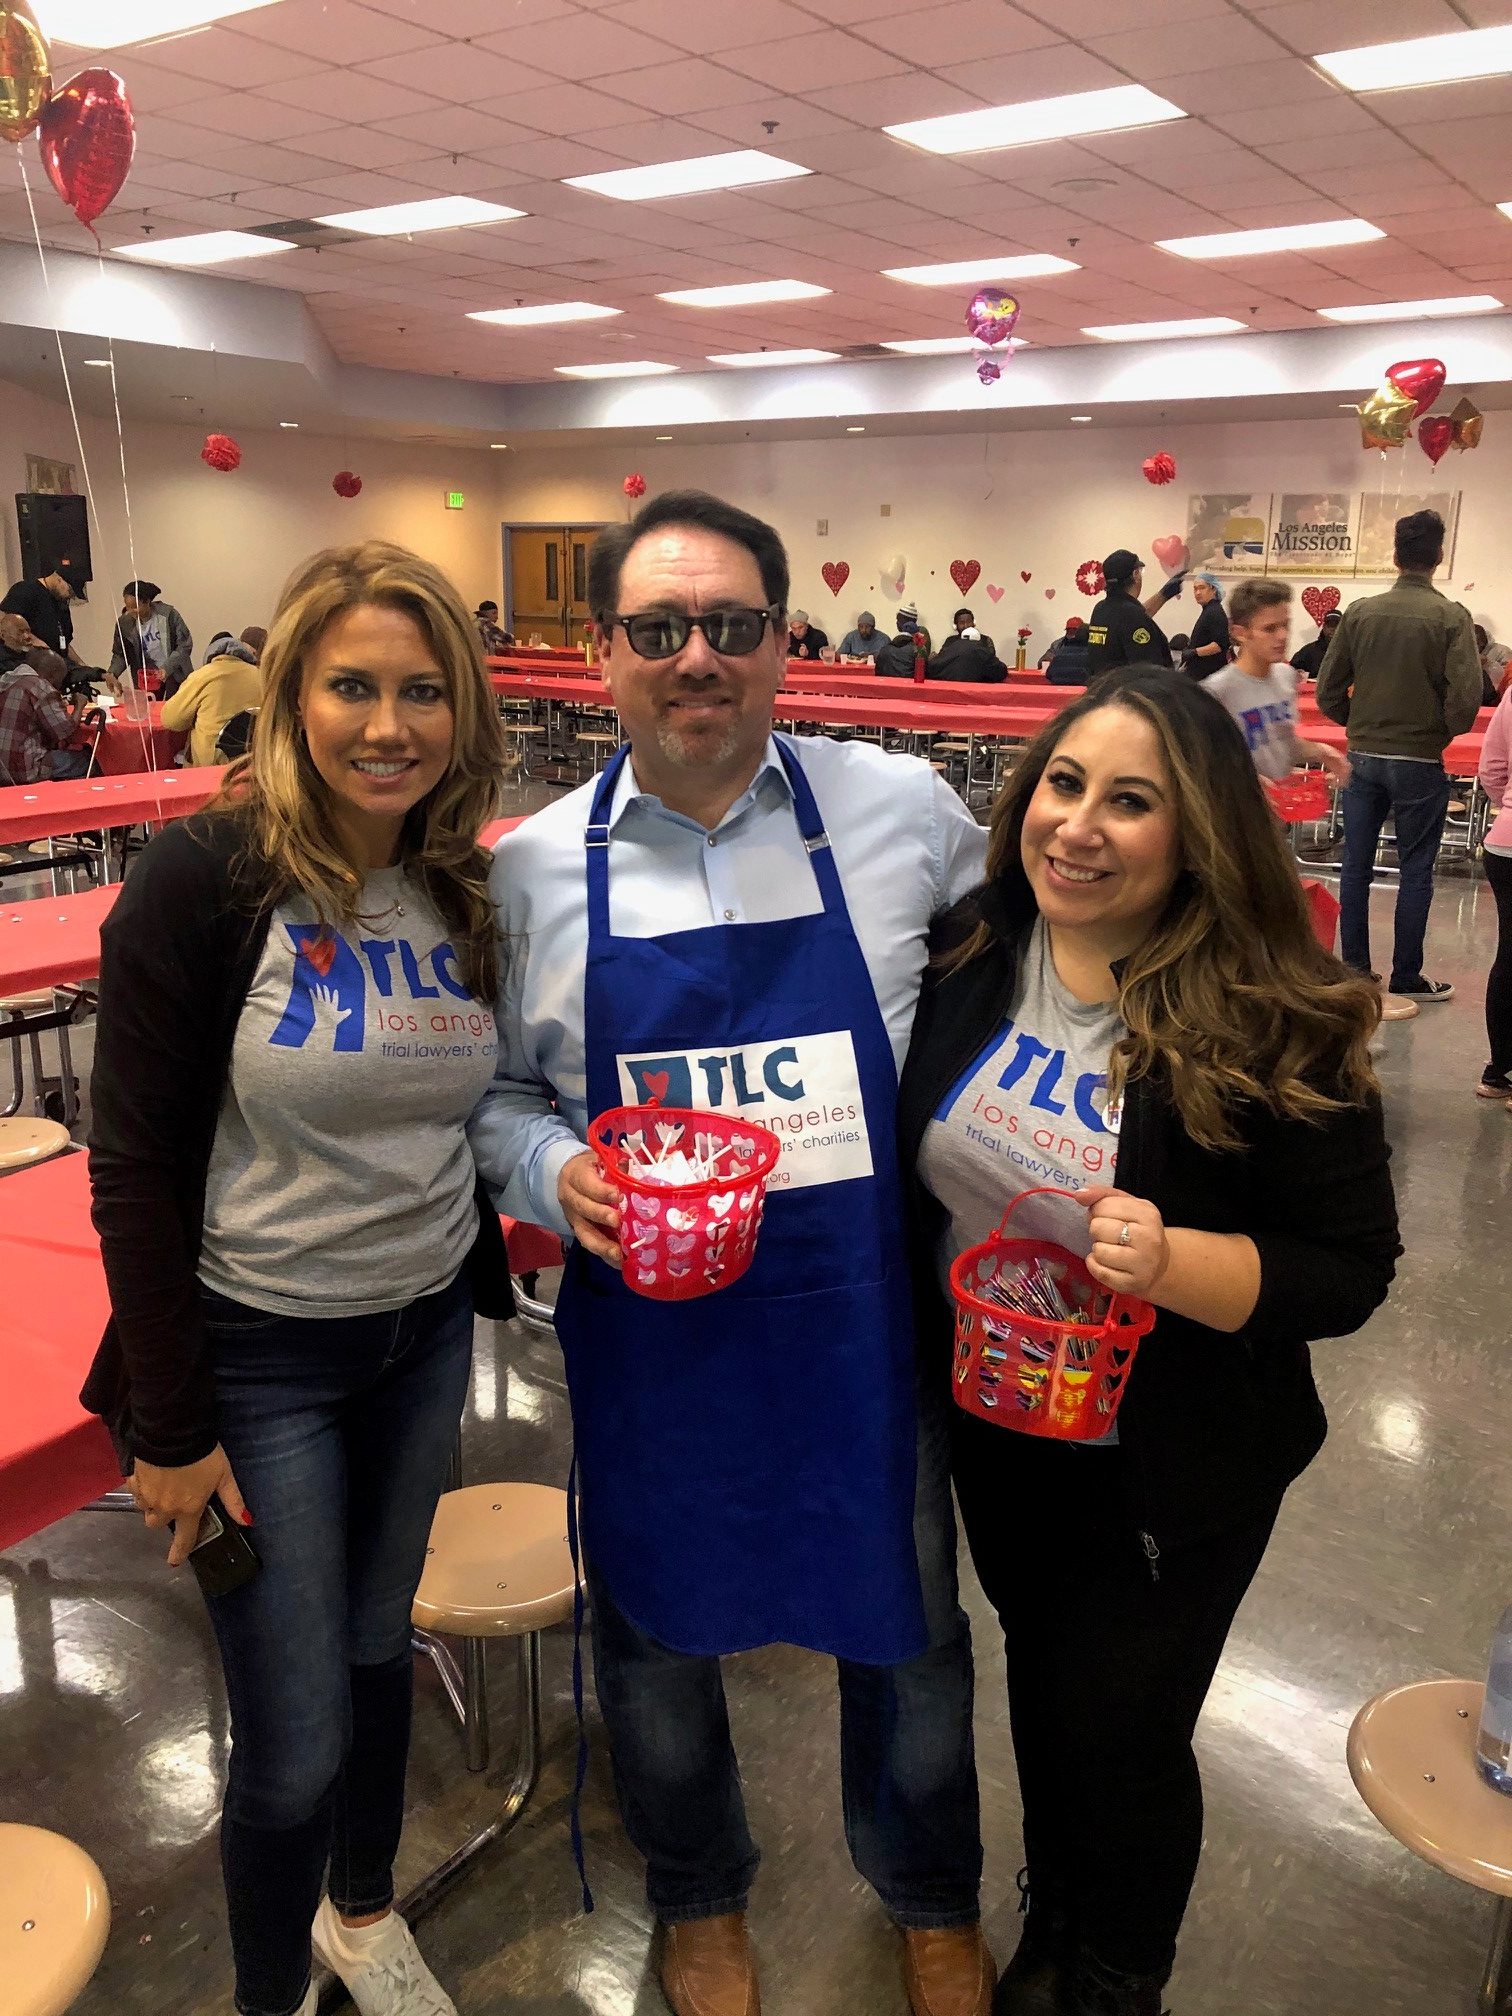 LATLC Charity Valentine's Event - Attorneys Howard Blumenthal and Angela Belty